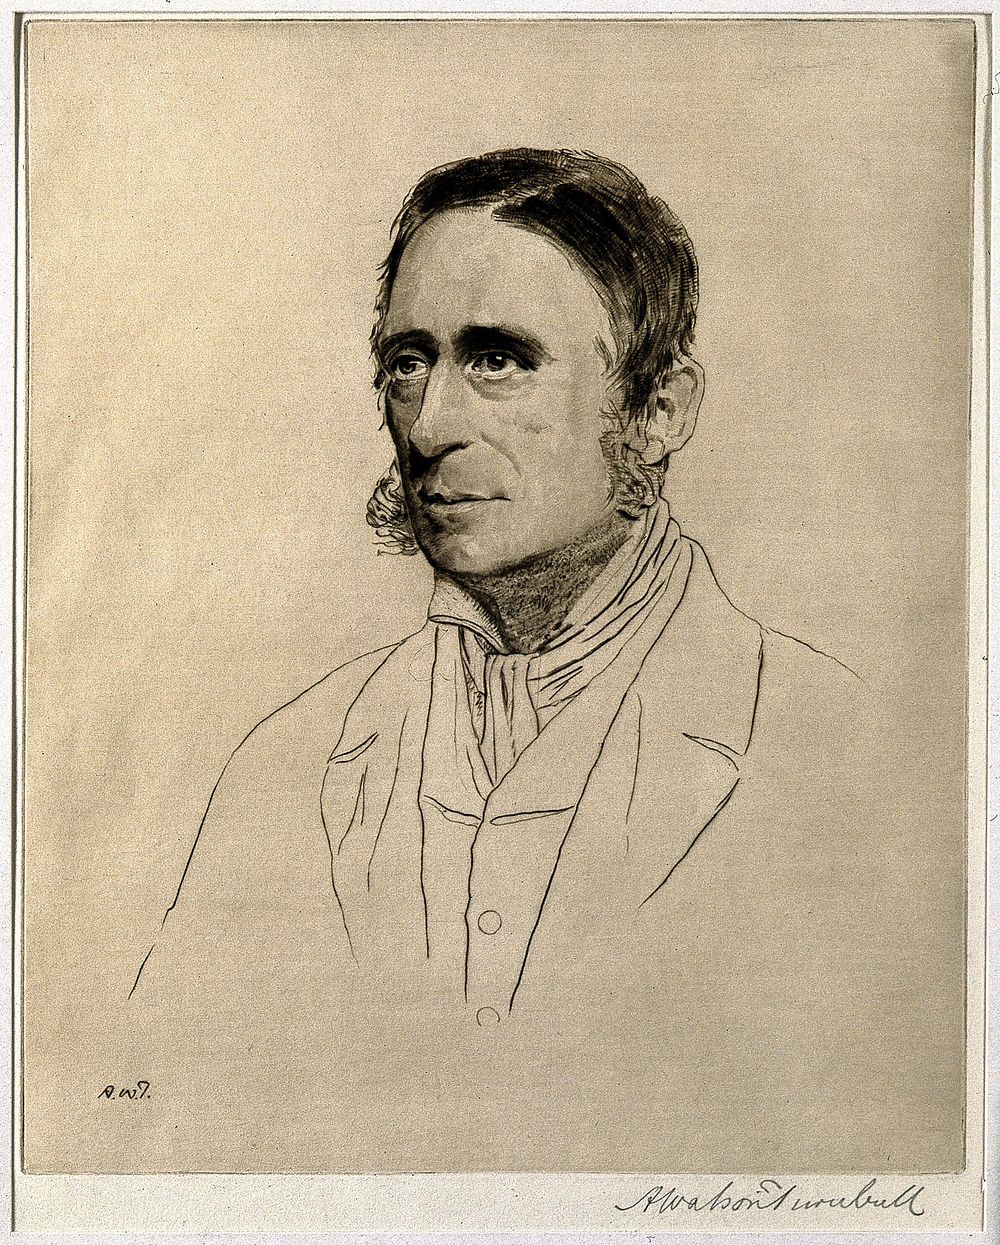 Sir James Paget. Etching by A. W. Turnbull.